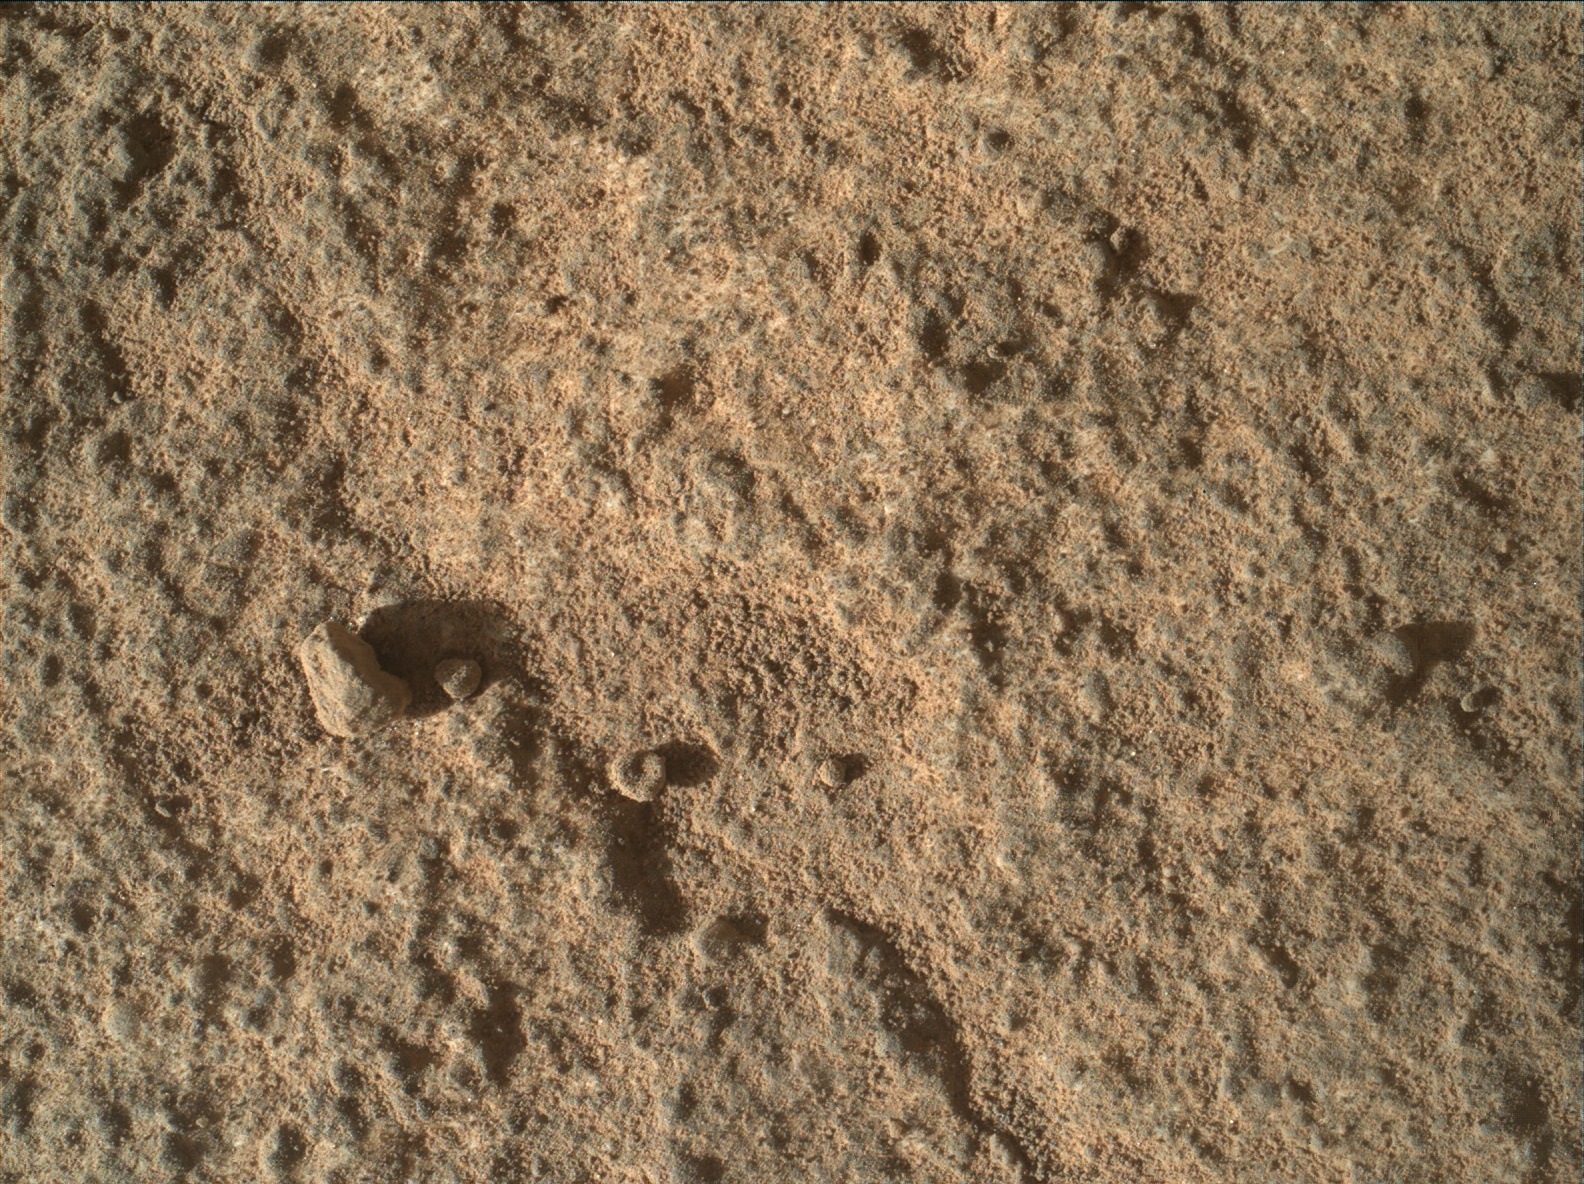 Nasa's Mars rover Curiosity acquired this image using its Mars Hand Lens Imager (MAHLI) on Sol 1288